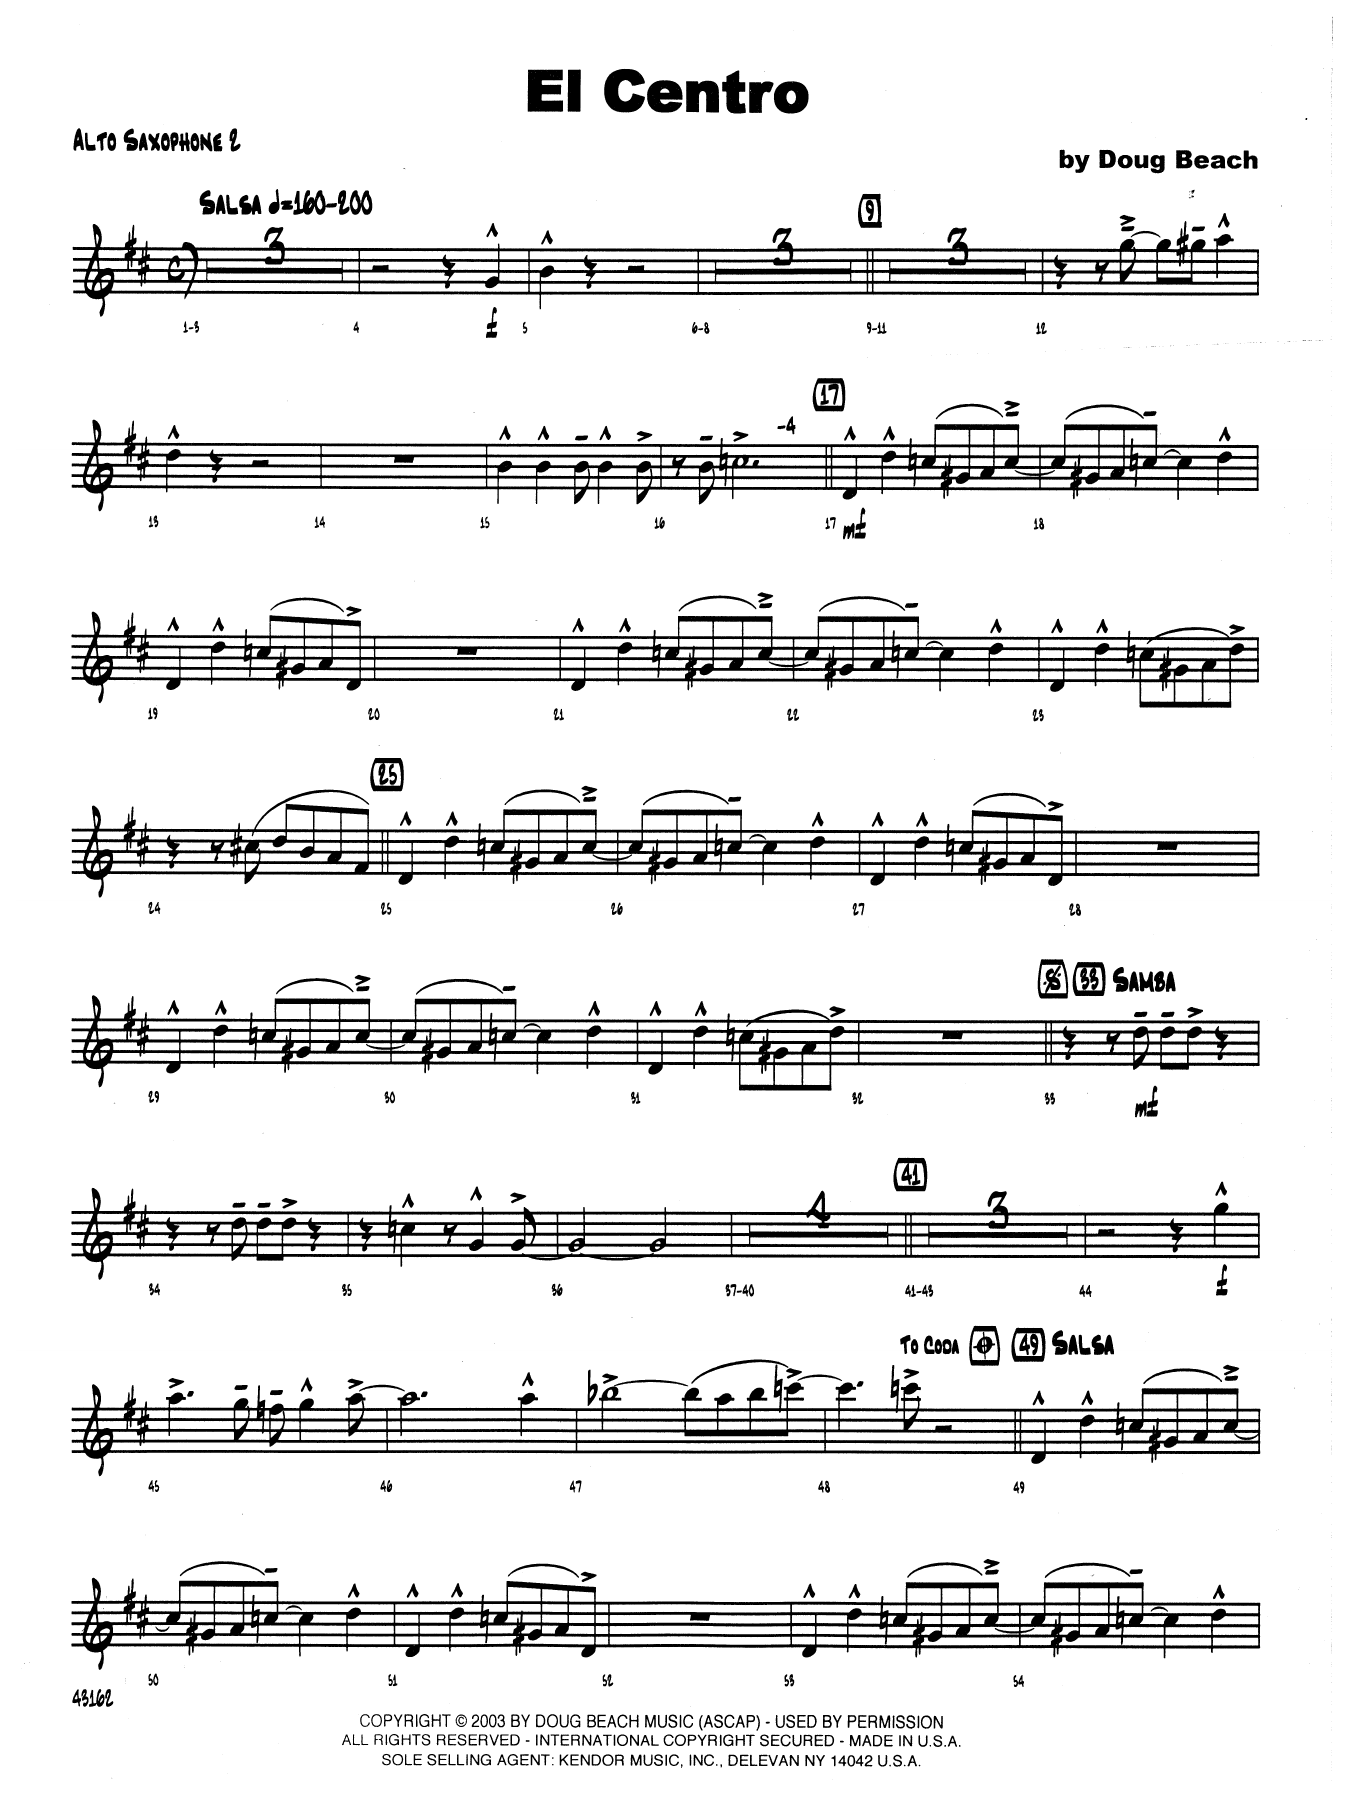 Download Neil Slater El Centro - Opt. Bass Clarinet Sheet Music